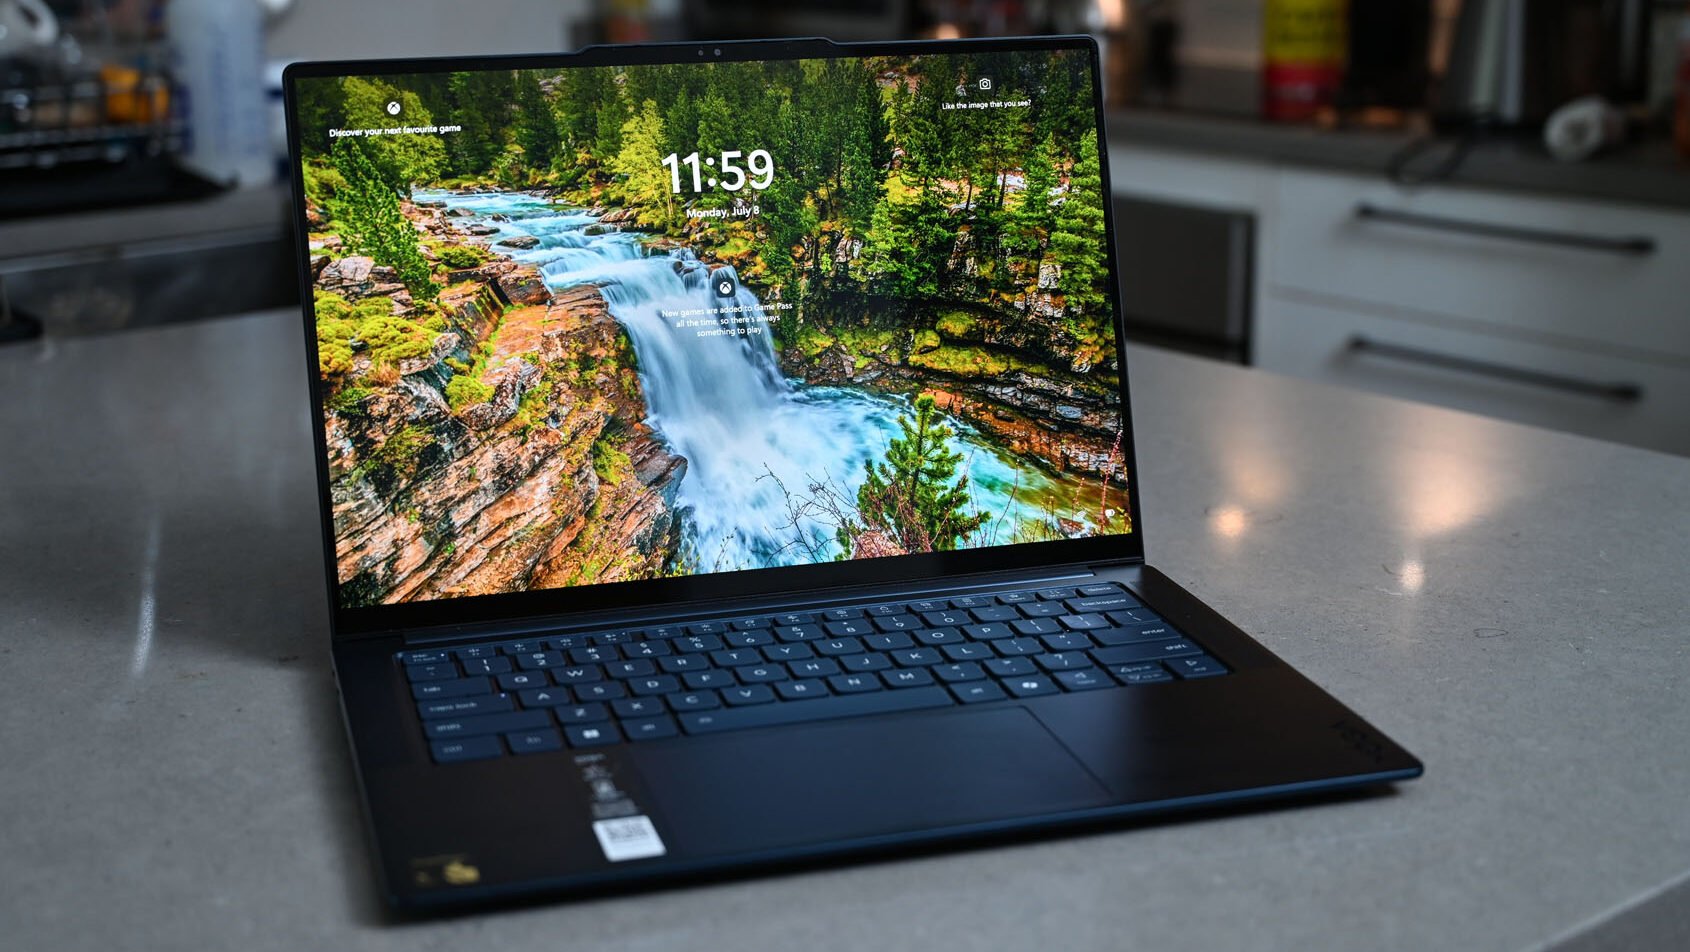 Lenovo Yoga Slim 7x Review: A Good Laptop With Lackluster AI Capabilities